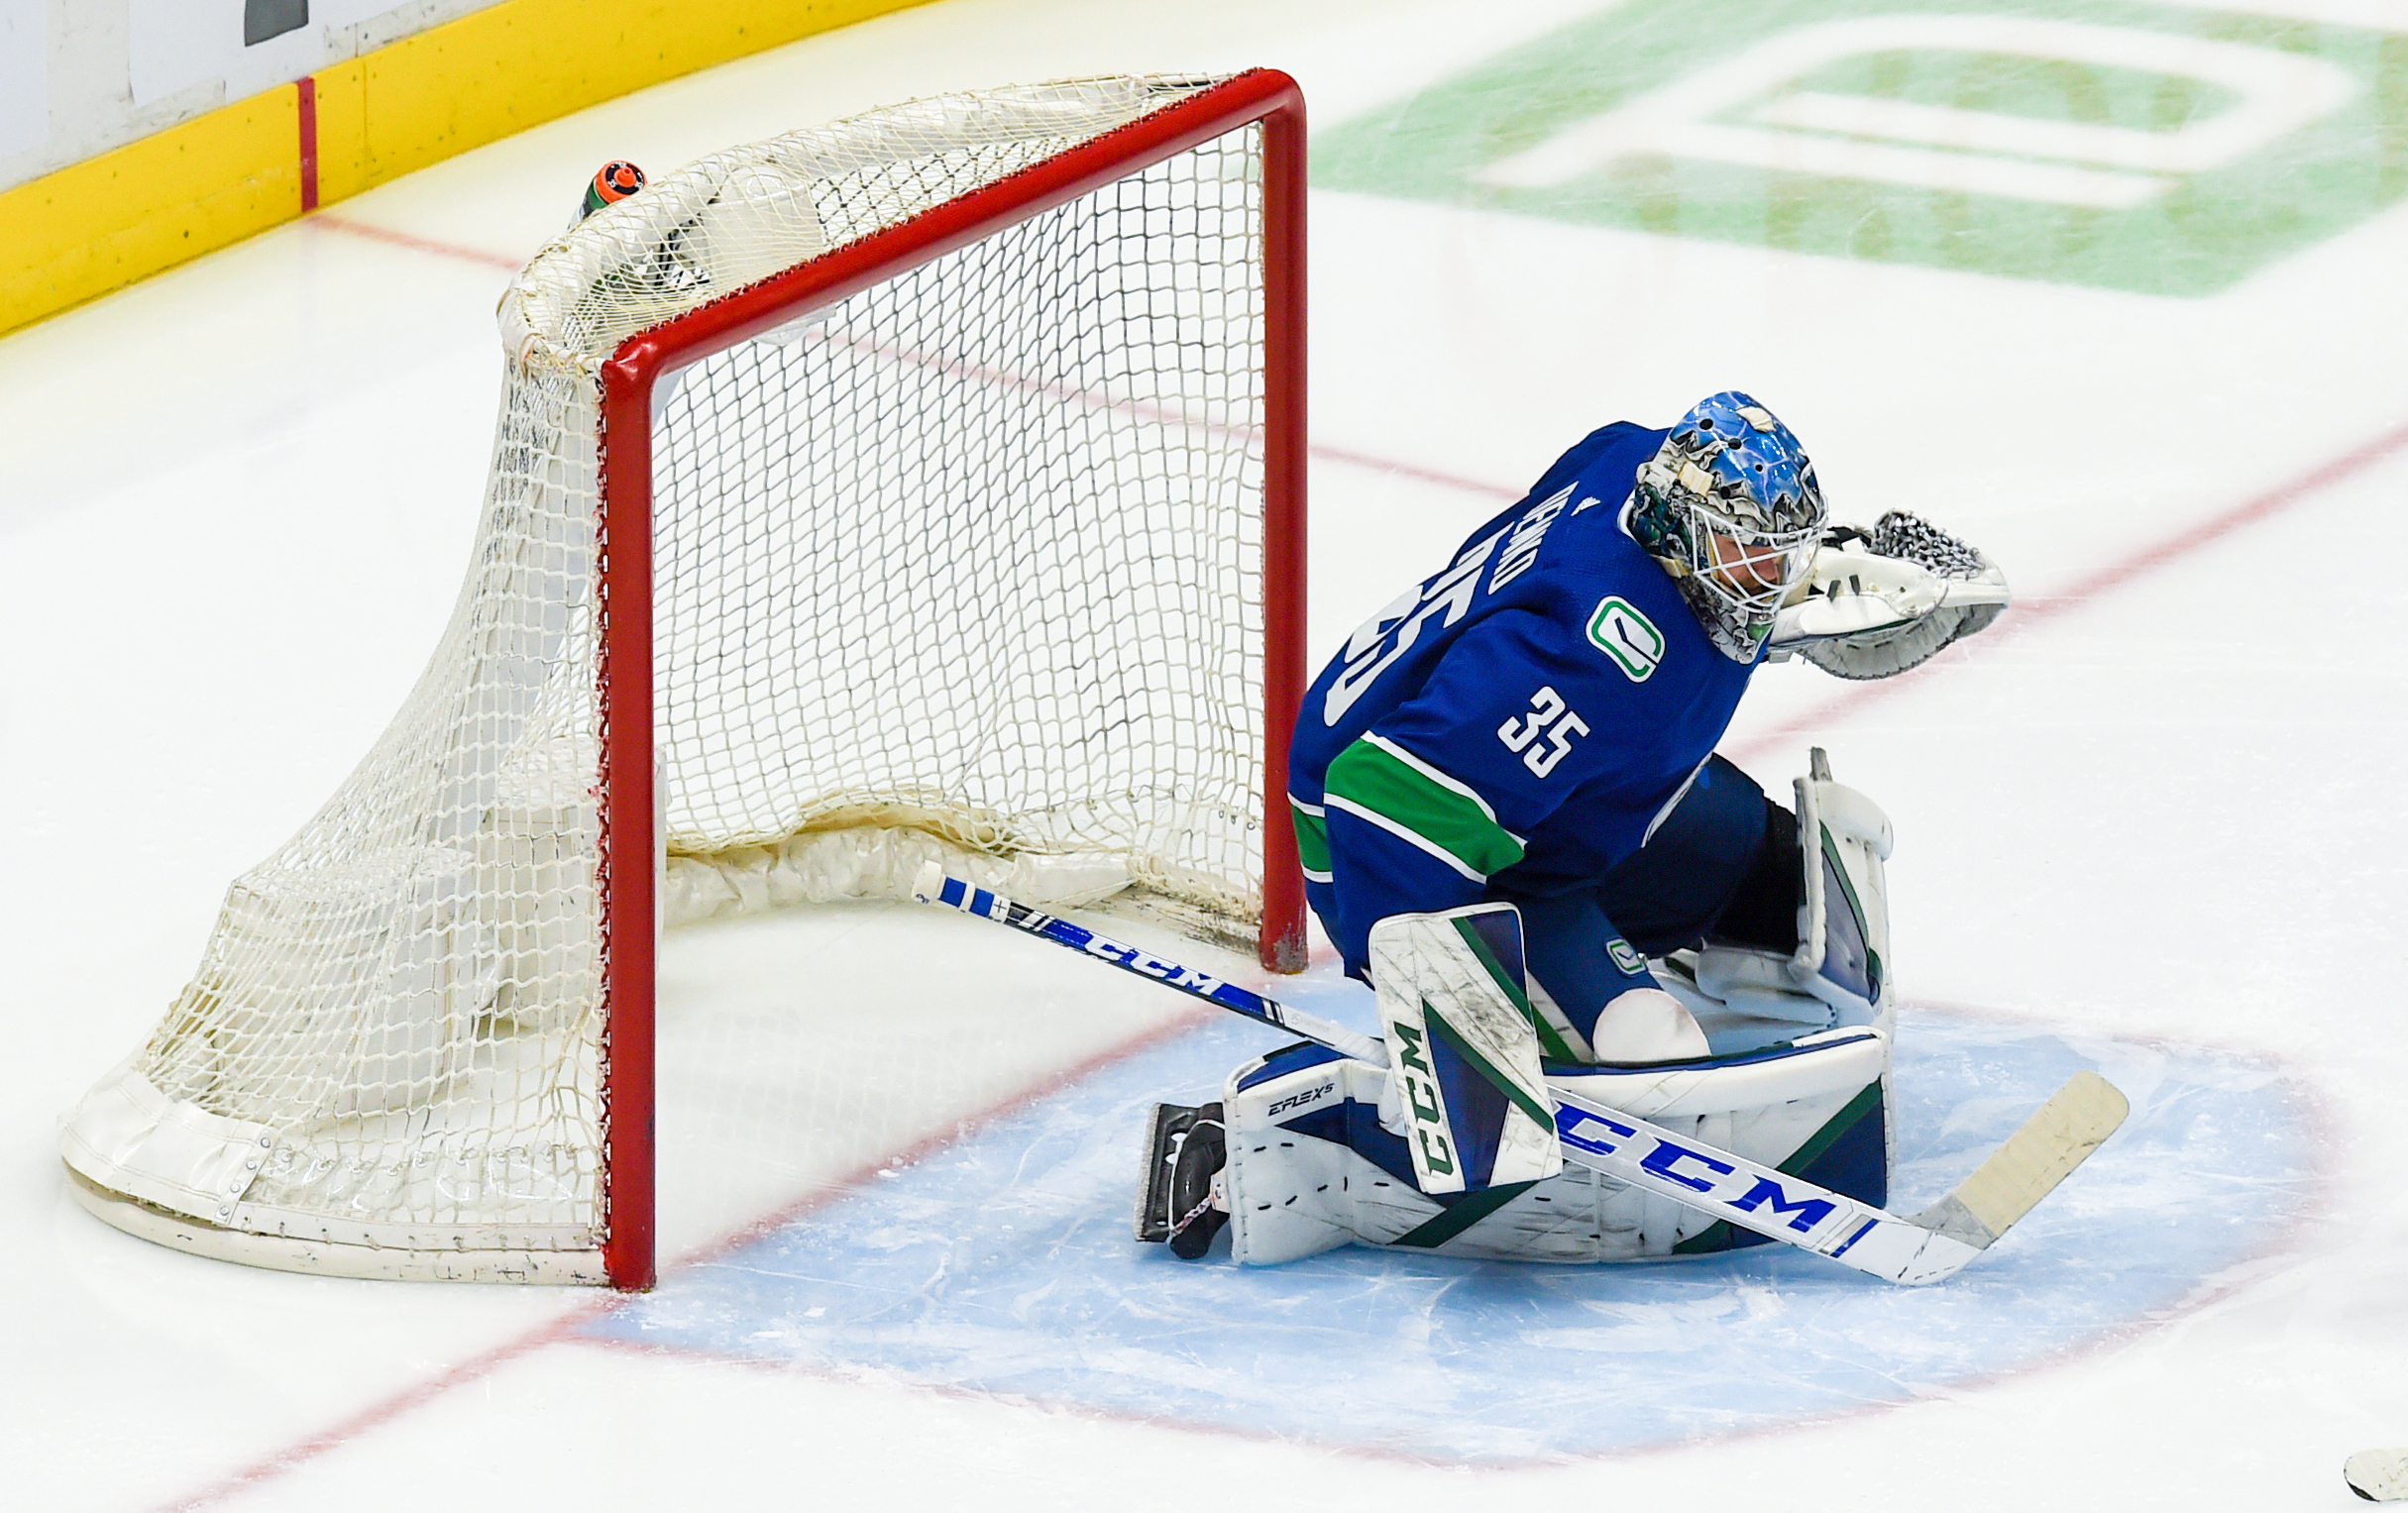 Demko makes 34 saves as Vancouver Canucks storm back for 6-4 win over Maple  Leafs - Vernon Morning Star